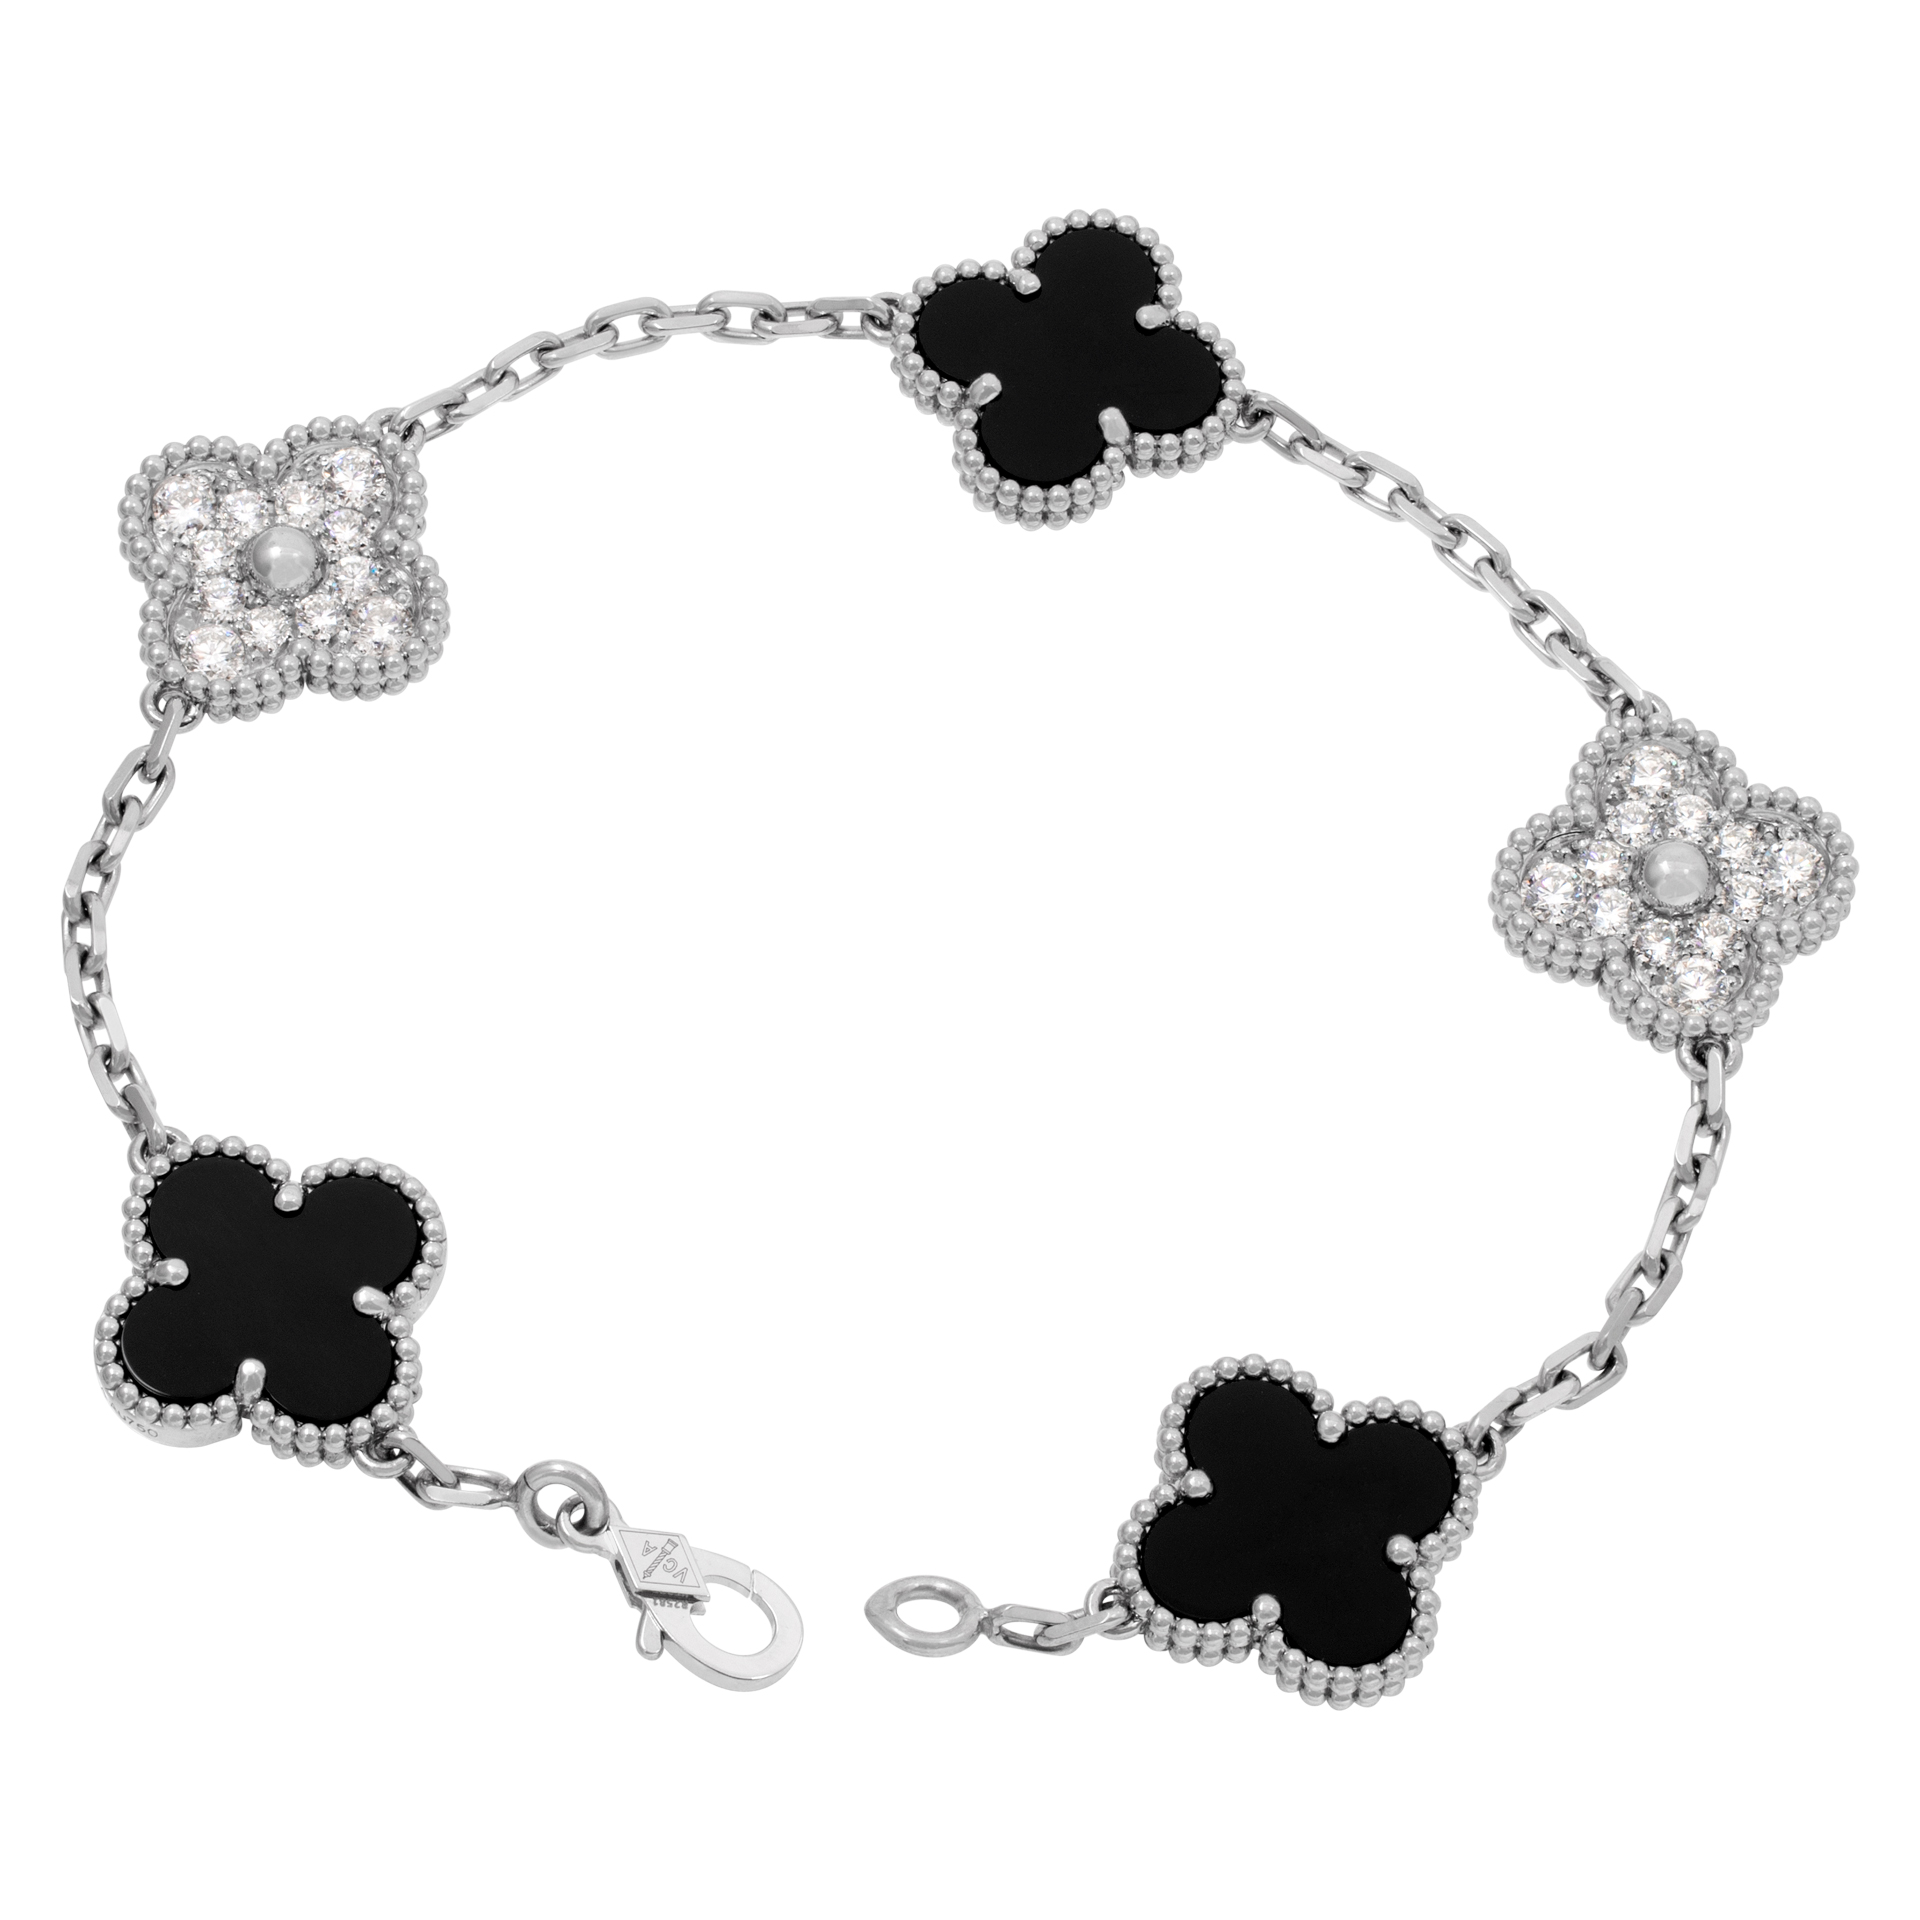 Van Cleef & Arpels Vintage Alhambra bracelet in 18k white gold with 3 onyx and 2 pave diamond motifs